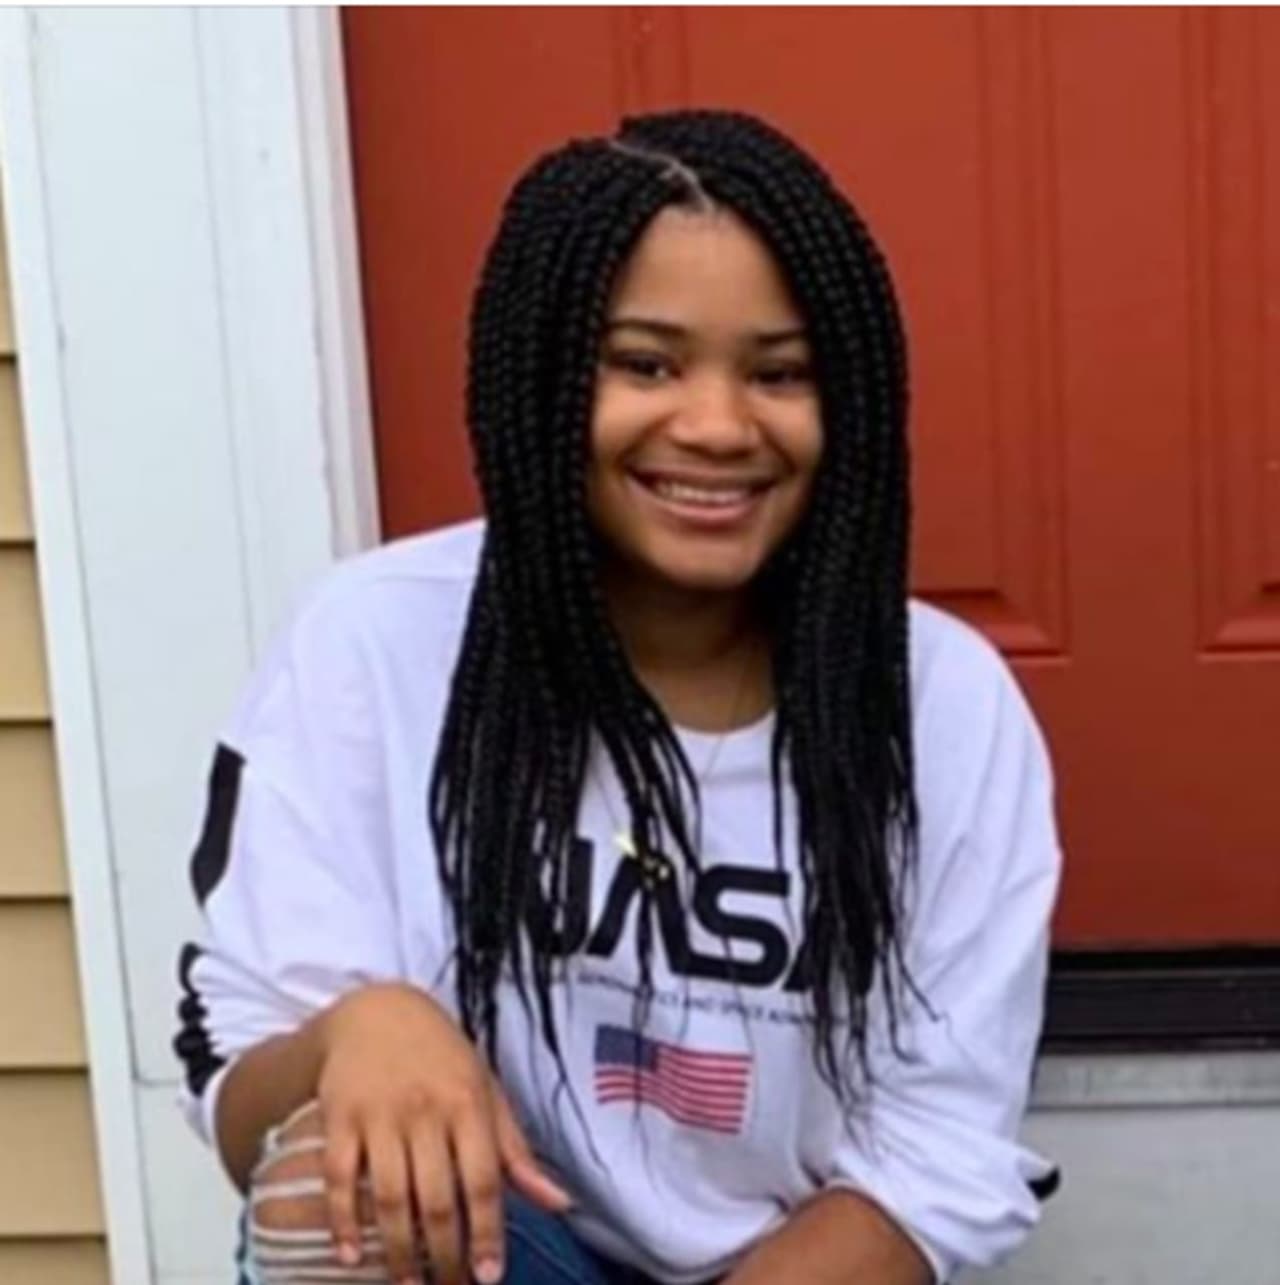 Sasha Goin, 14 of Maplewood, was last seen leaving her house on Tuesday.